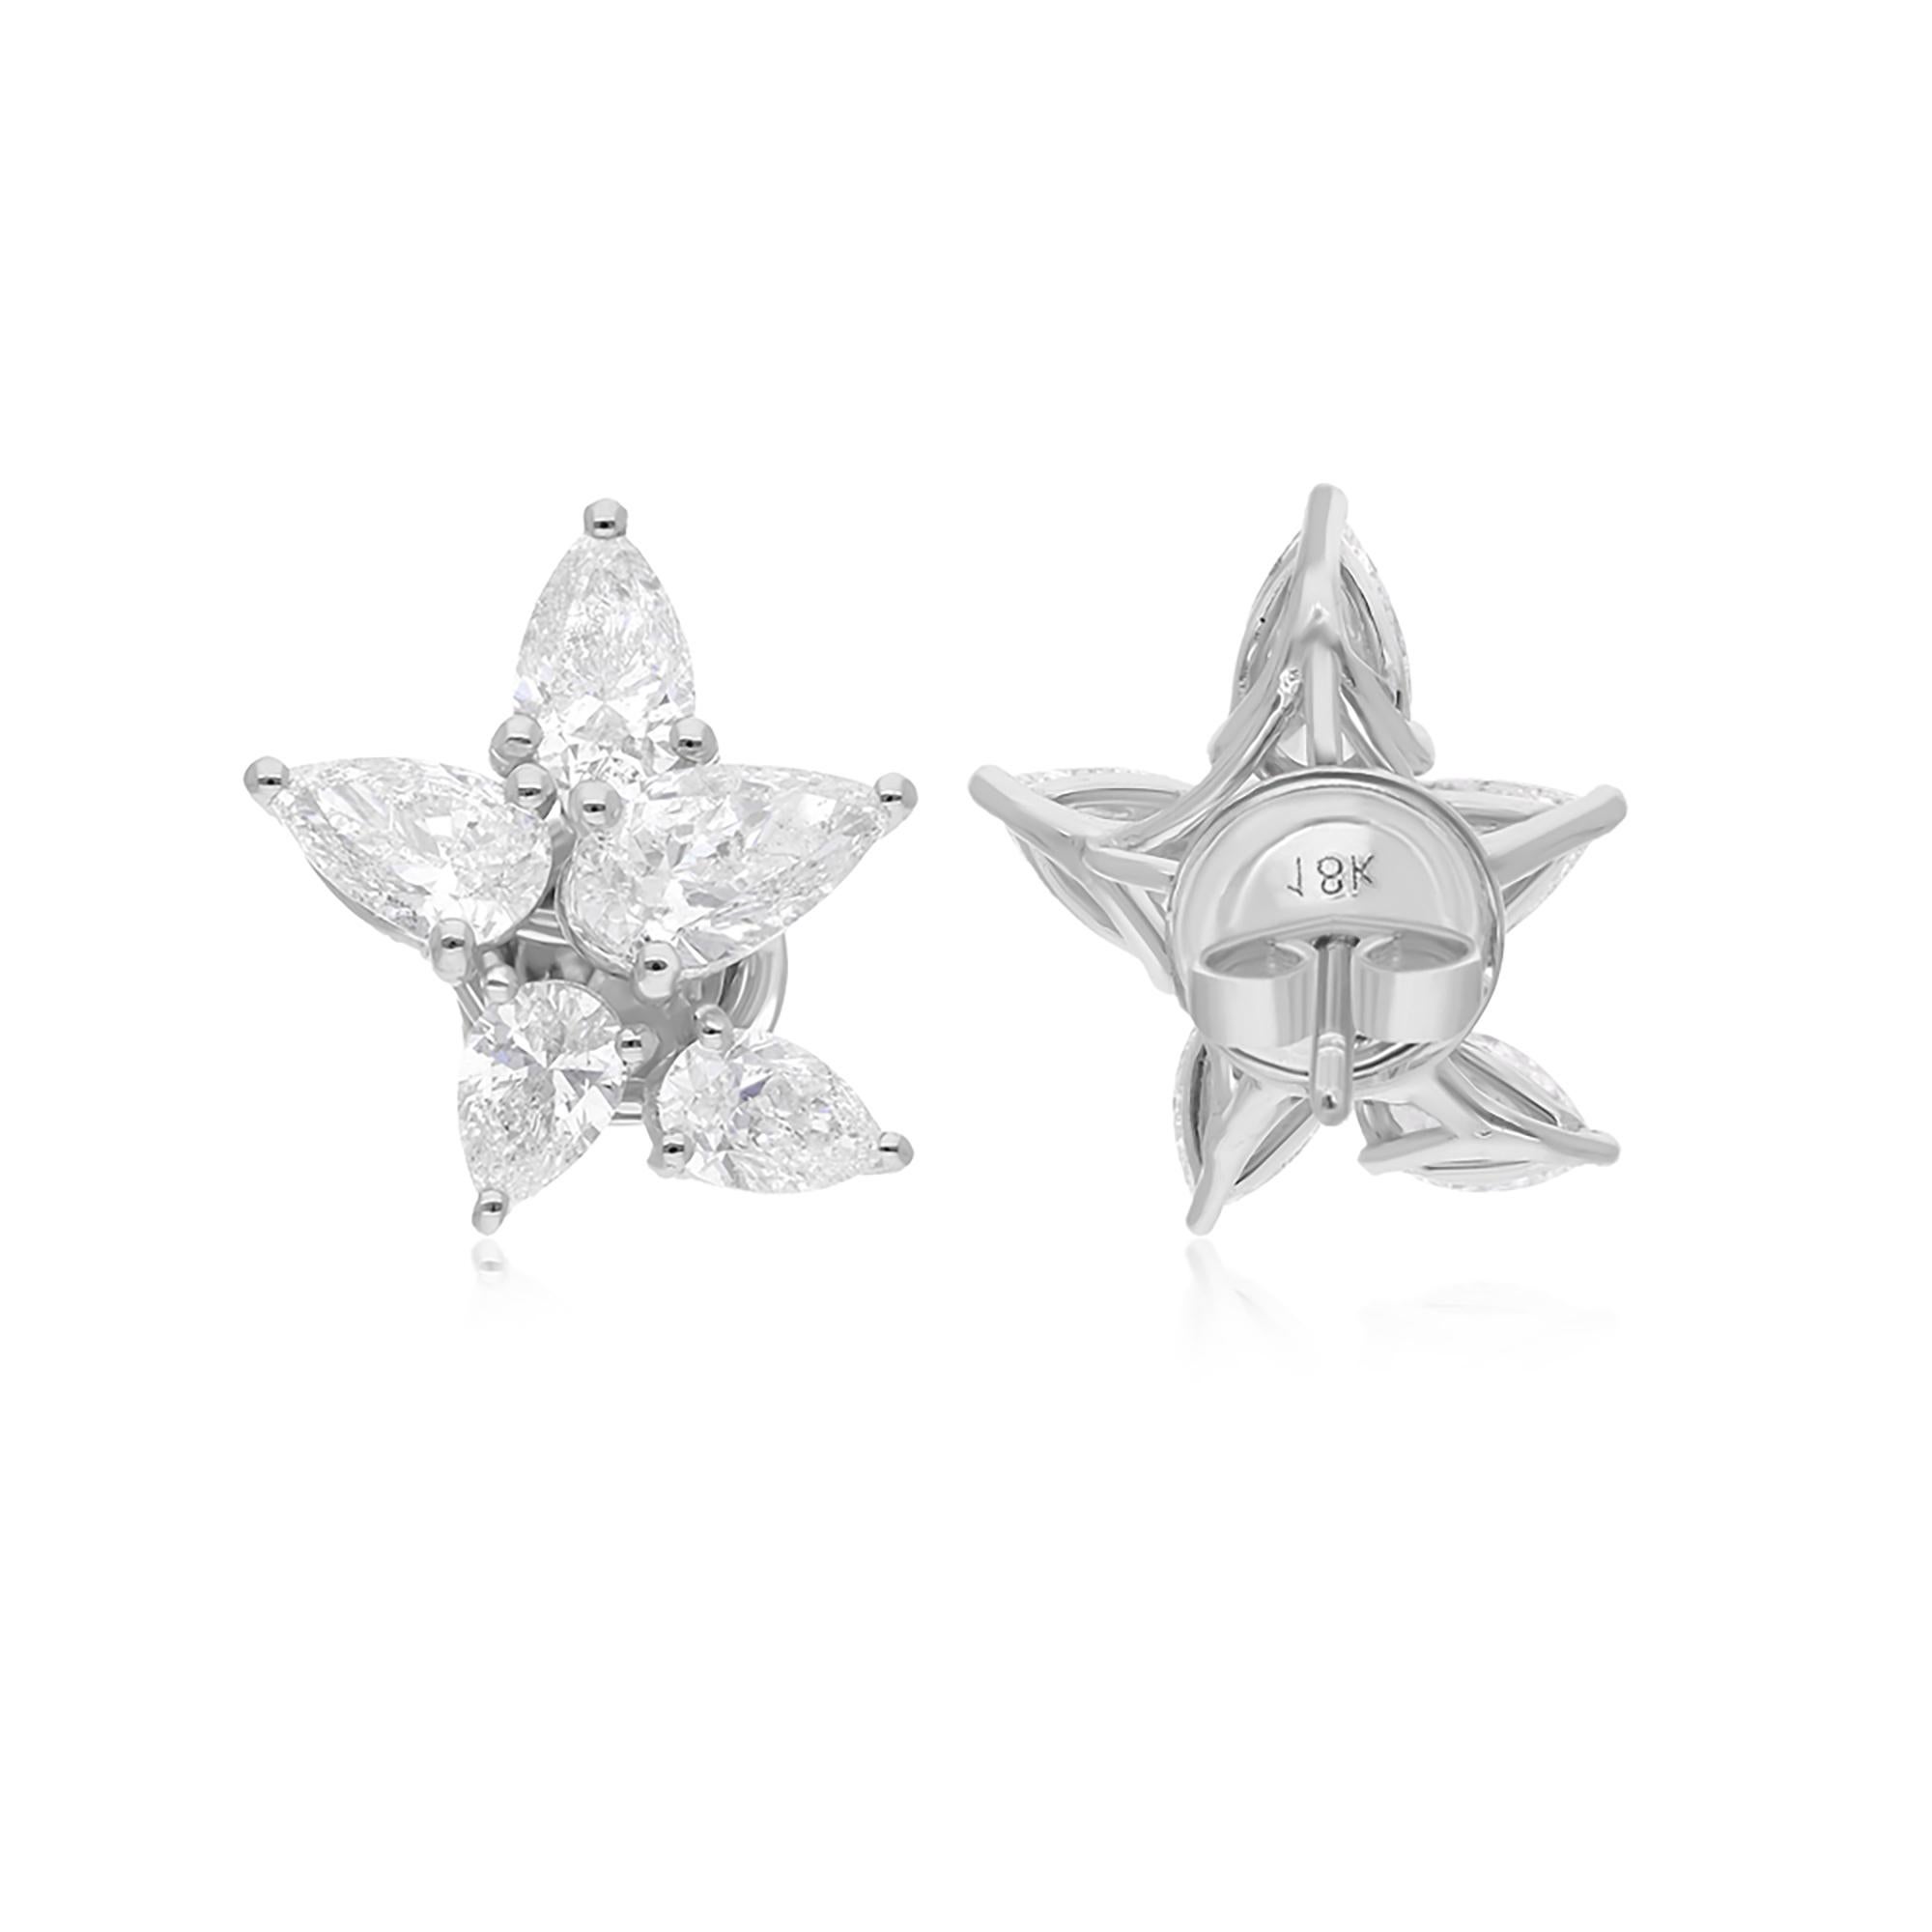 The classic stud design of these earrings offers versatility and timeless appeal, seamlessly transitioning from casual to formal occasions with effortless grace. Whether worn as a dazzling accent for everyday elegance or as a glamorous statement